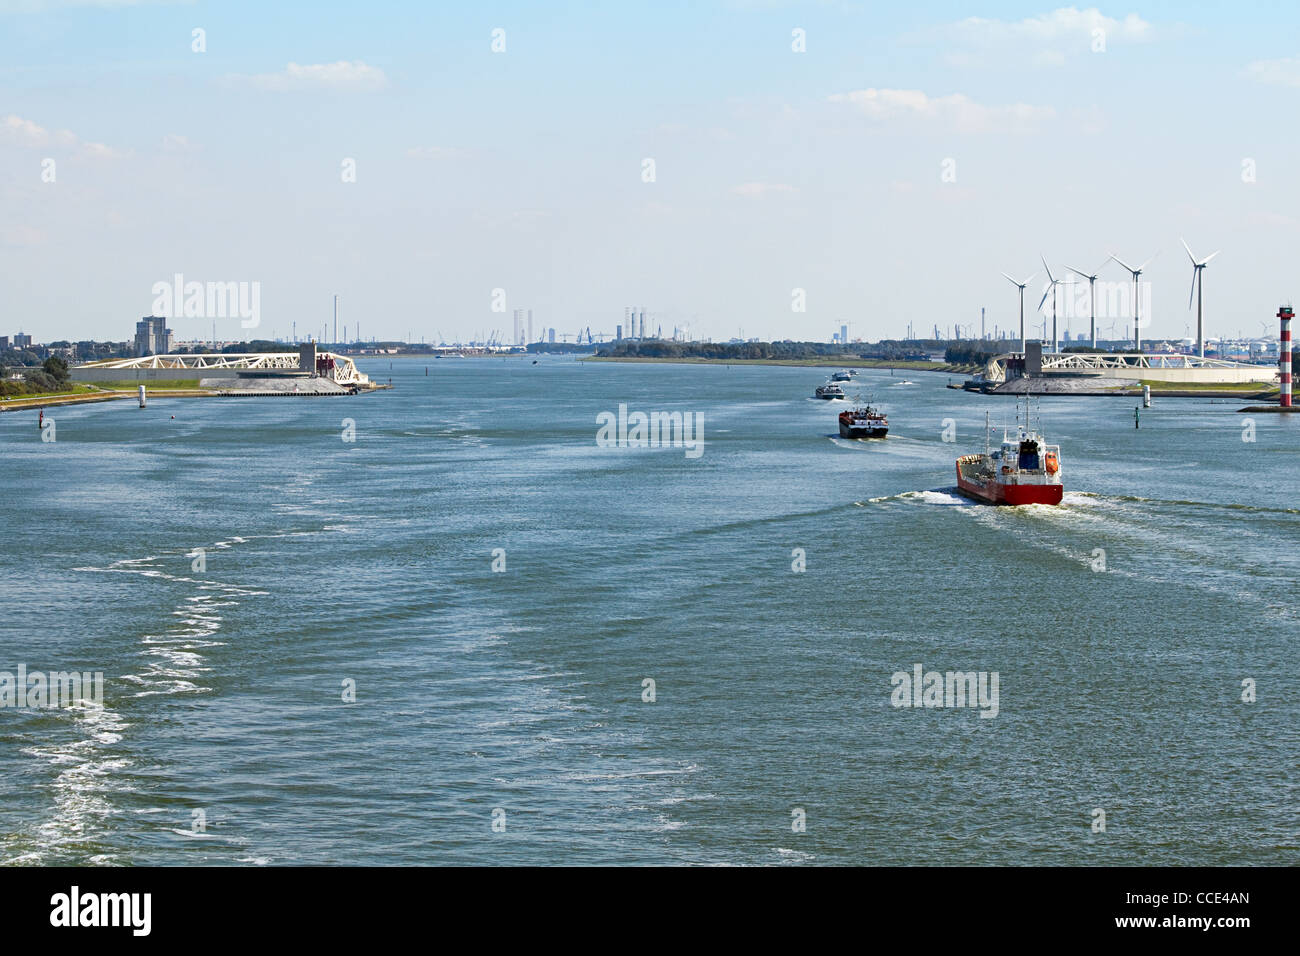 Storm surge barrier Maaslantkering in open position in the river Maas near Rotterdam, the Netherlands Stock Photo